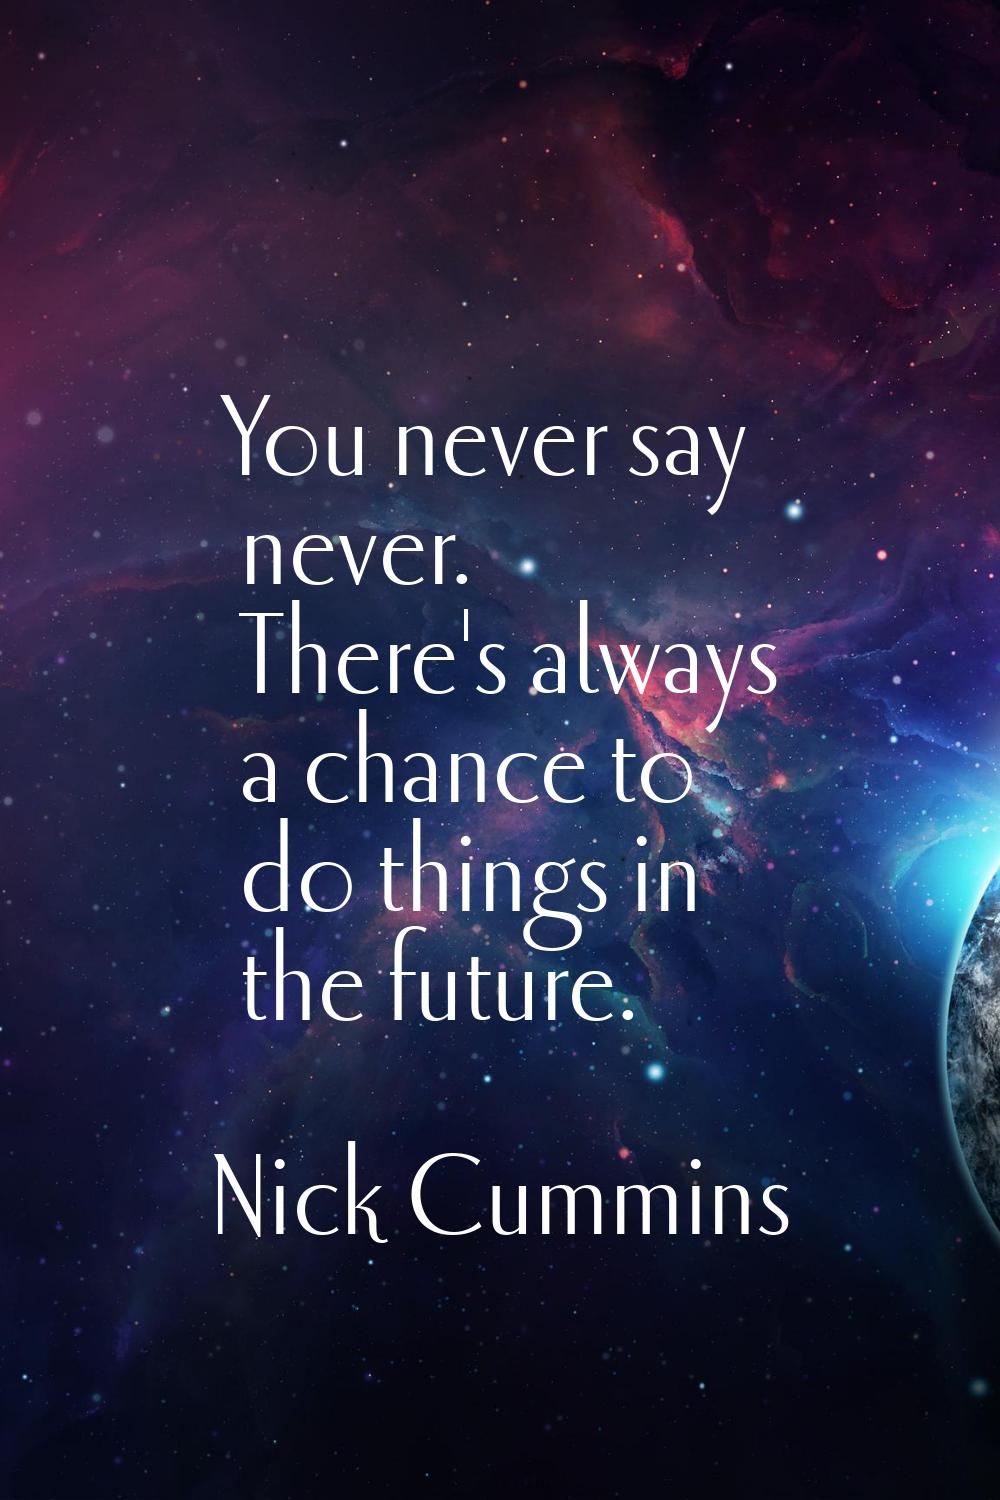 You never say never. There's always a chance to do things in the future.